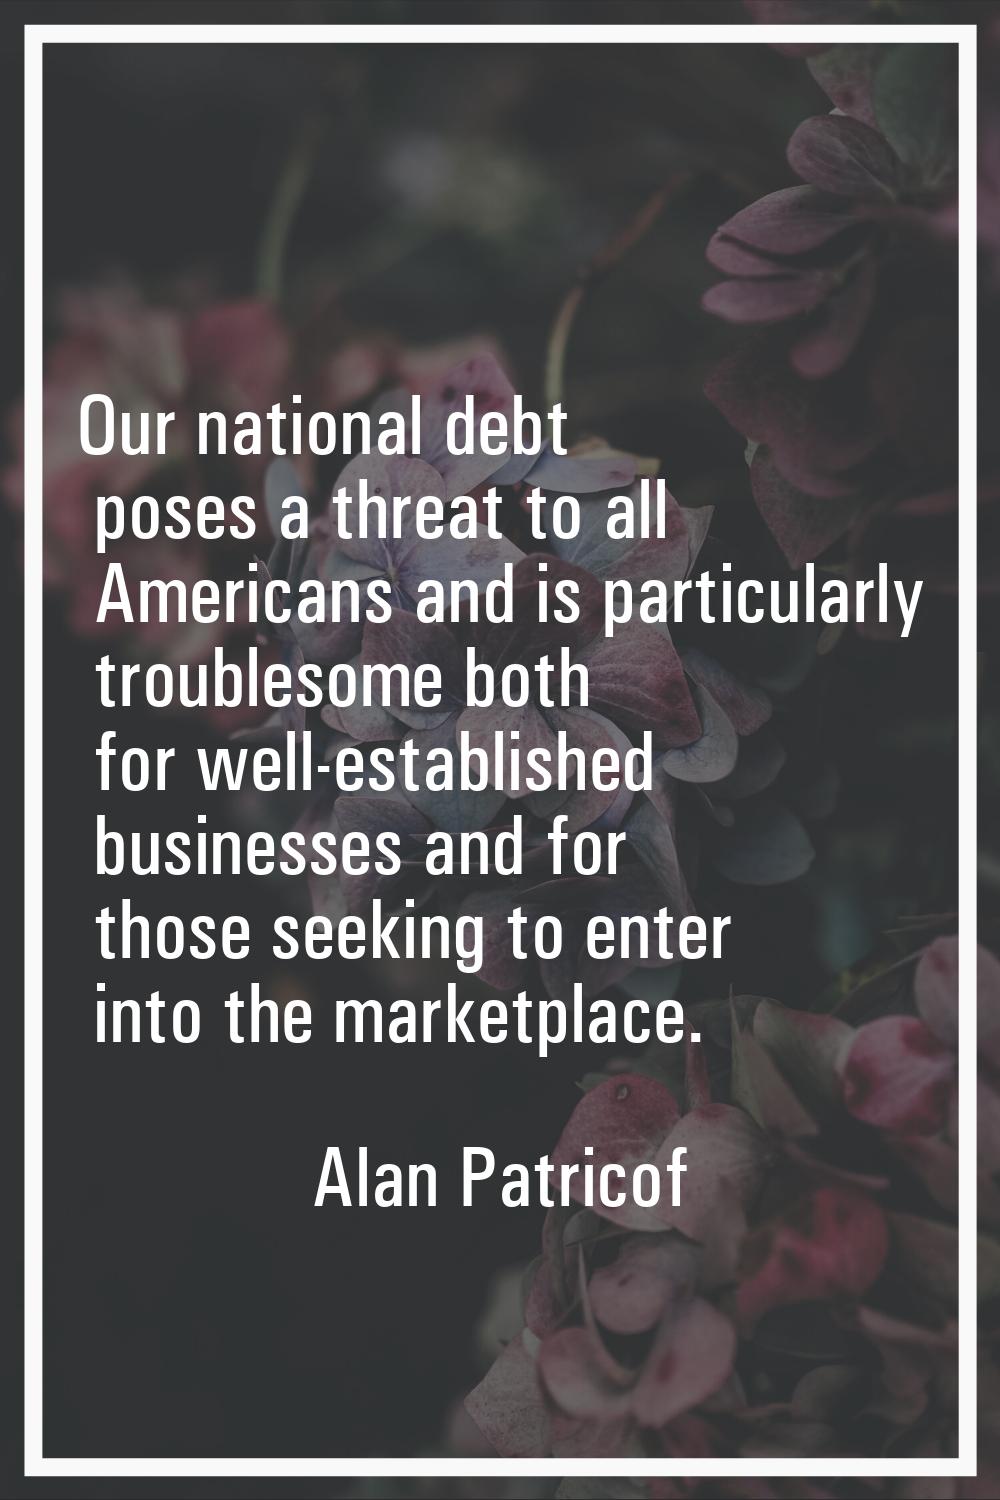 Our national debt poses a threat to all Americans and is particularly troublesome both for well-est